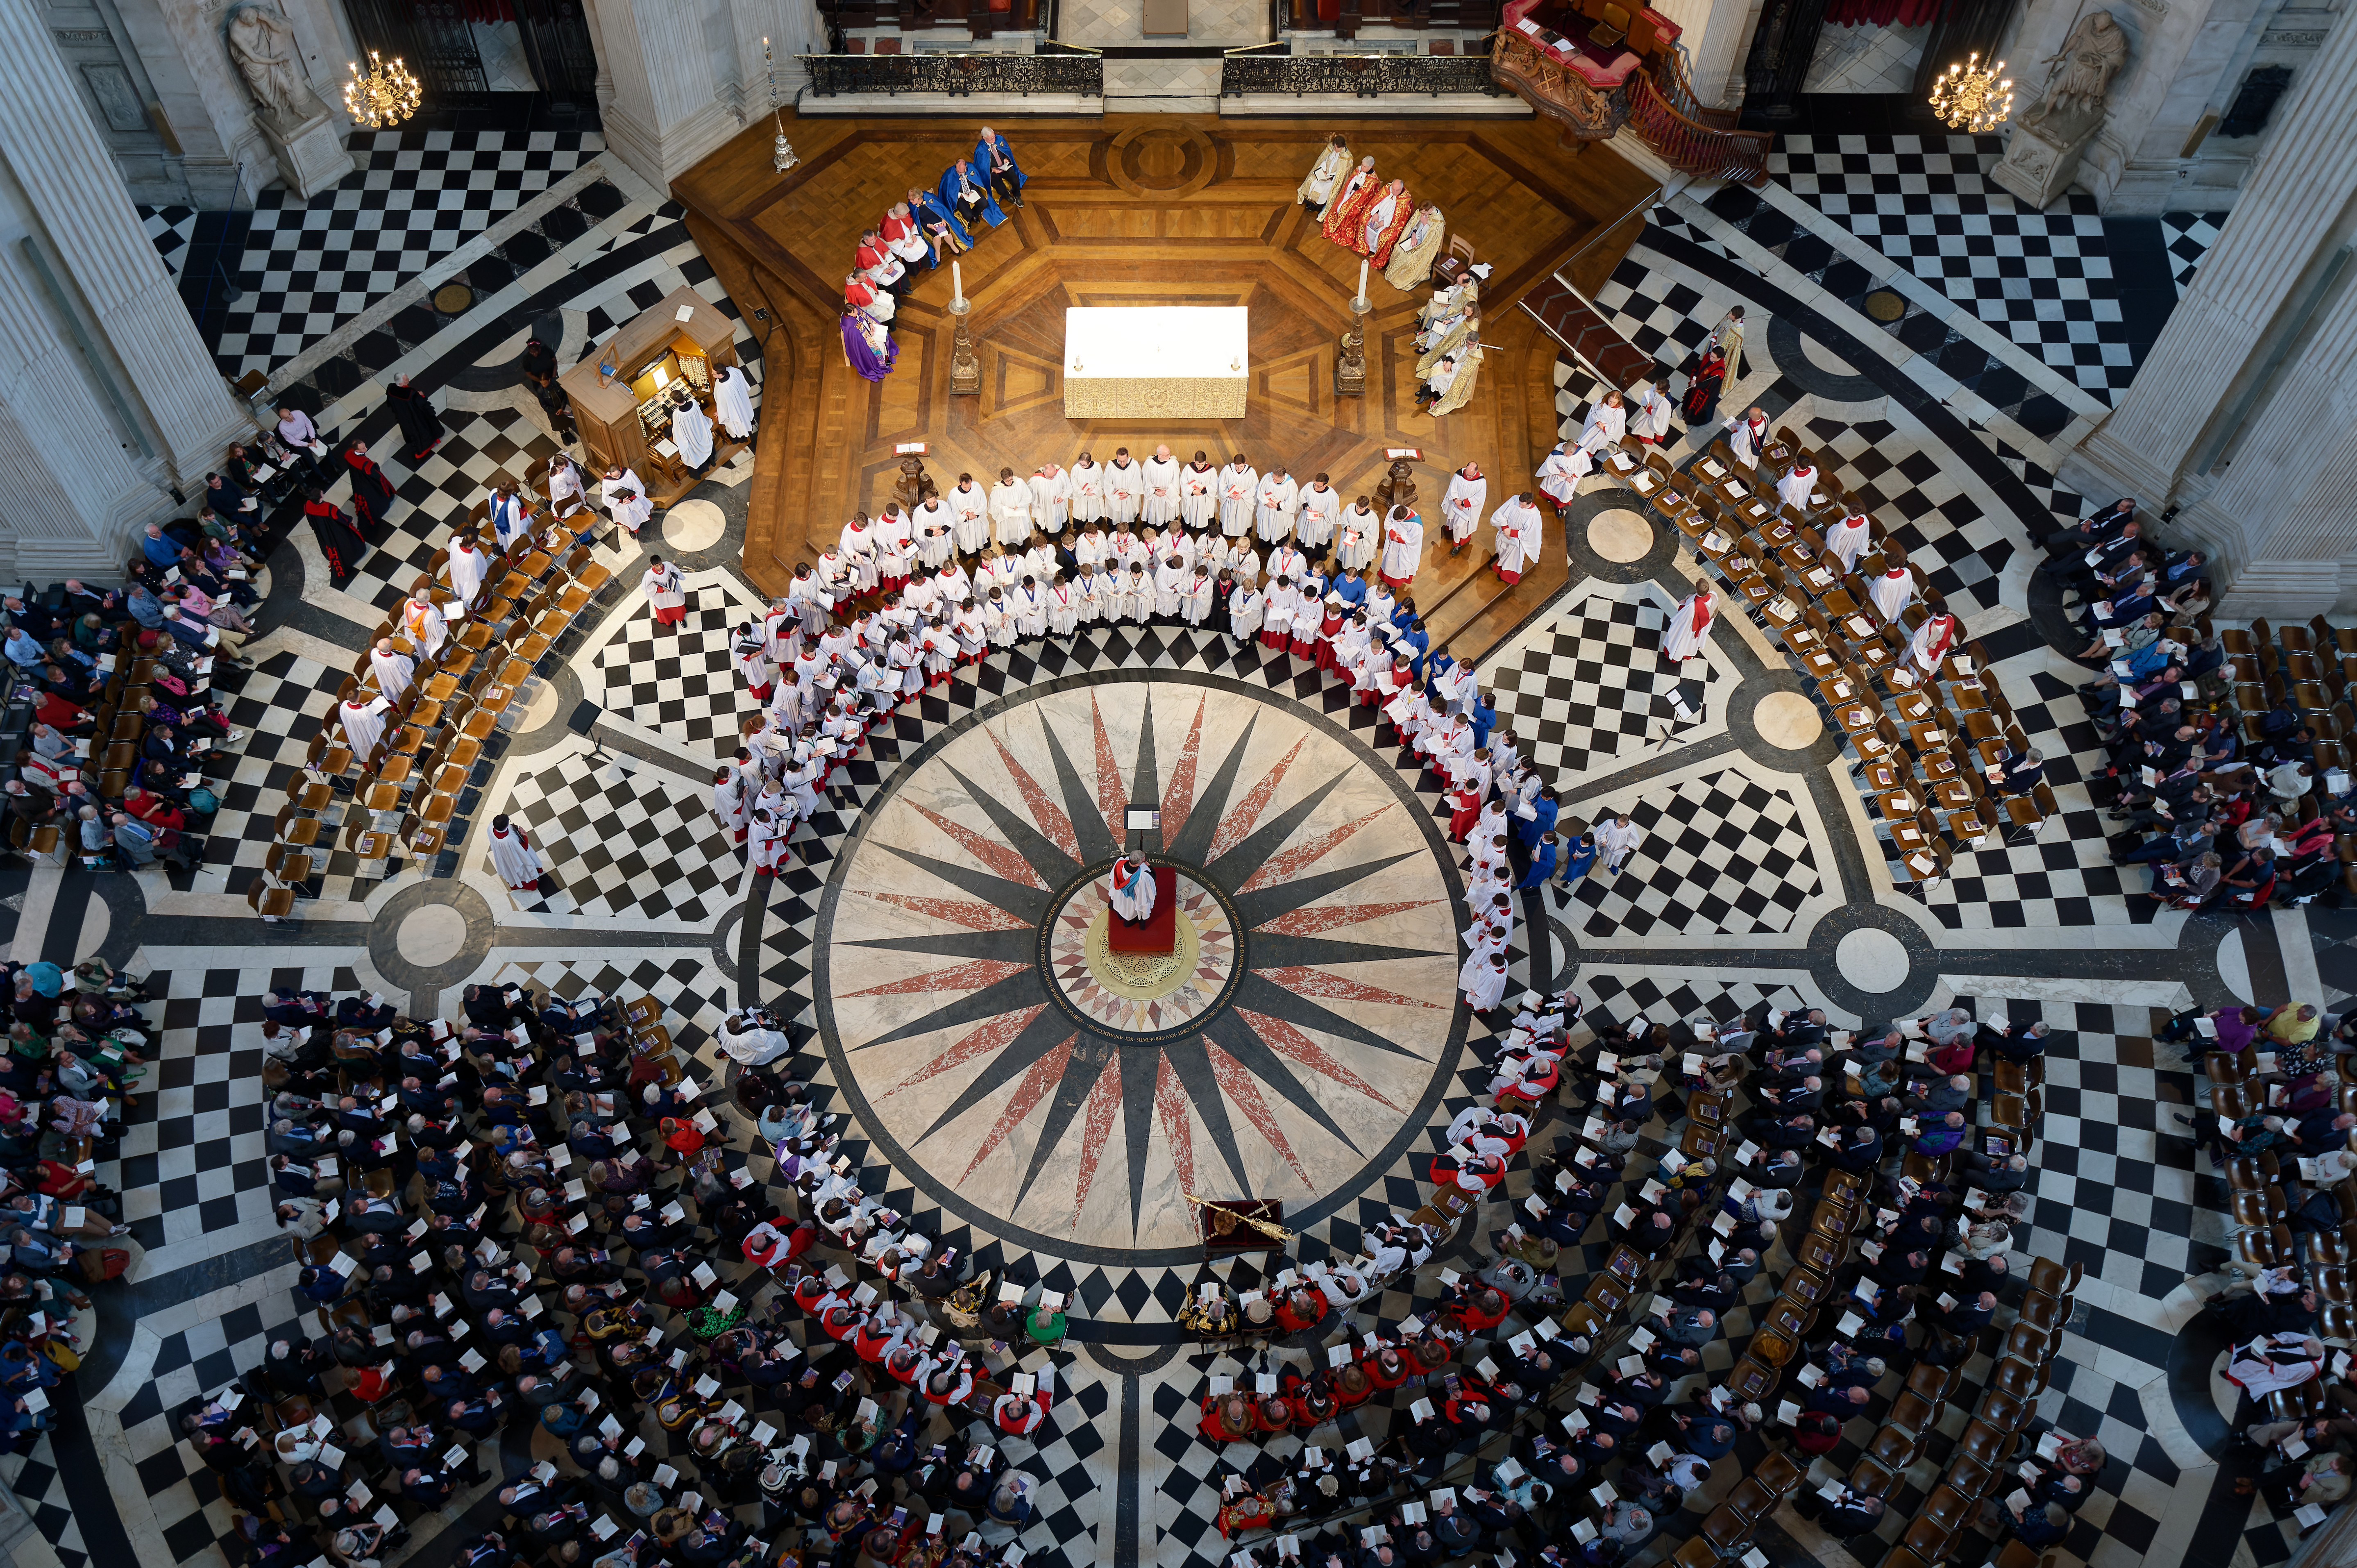 A bird's eye view, taken from the dome of St Paul's Cathedral, of the three combined choirs performing together in a semi-circle formation.